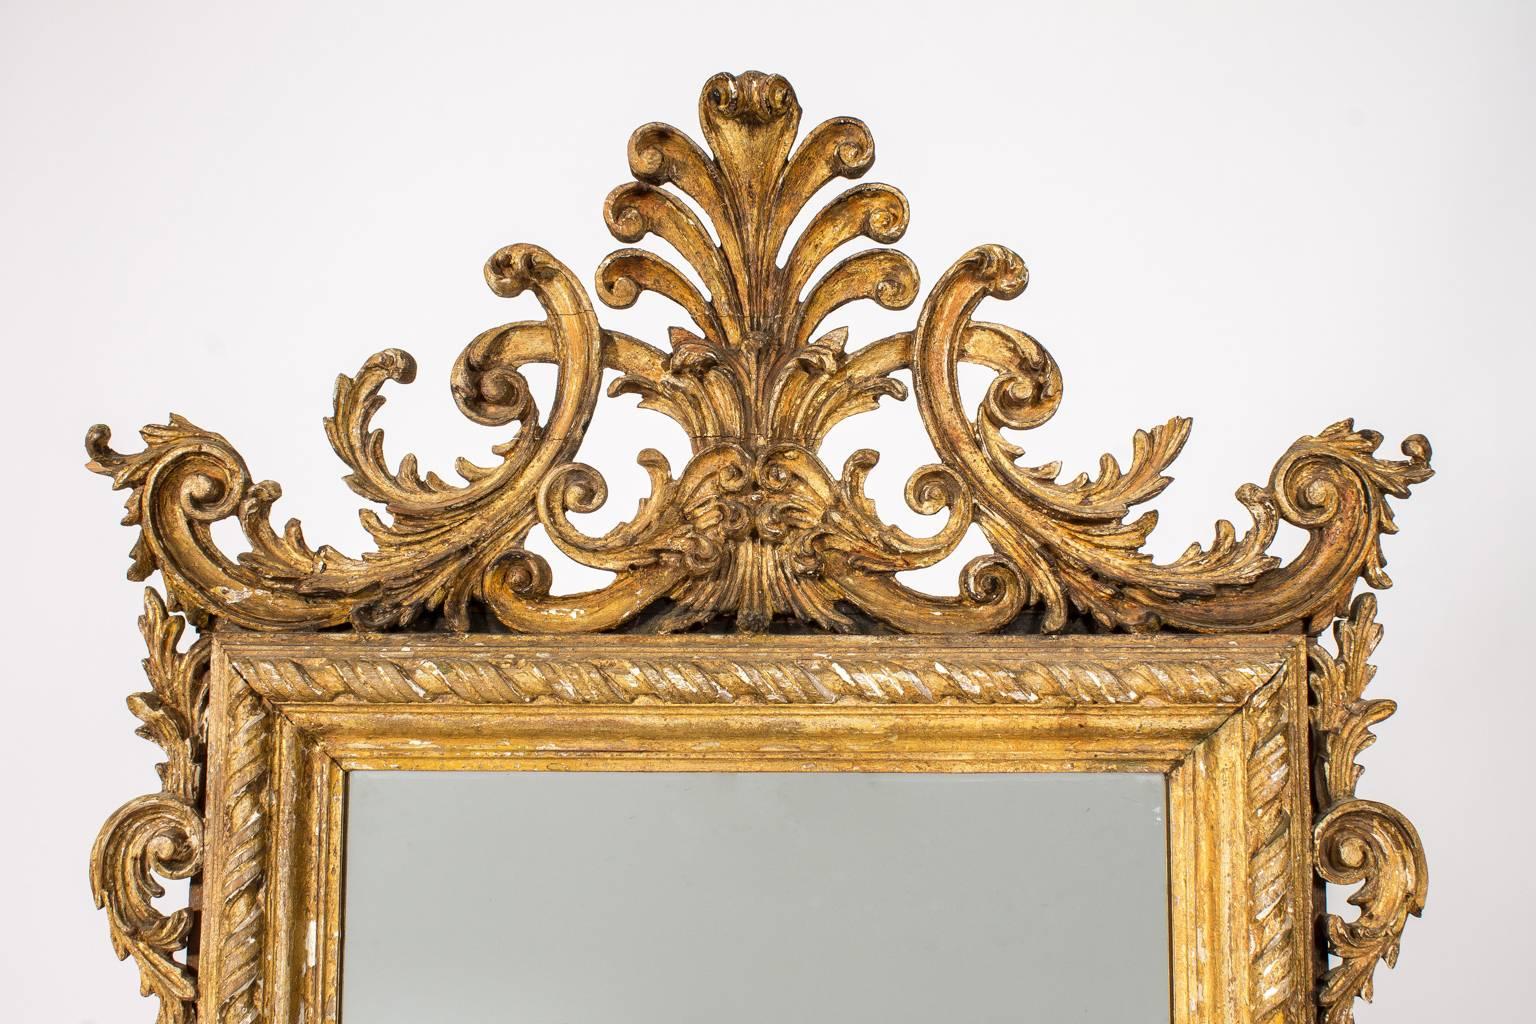 Large decorative mirror in a heavily craved frame.